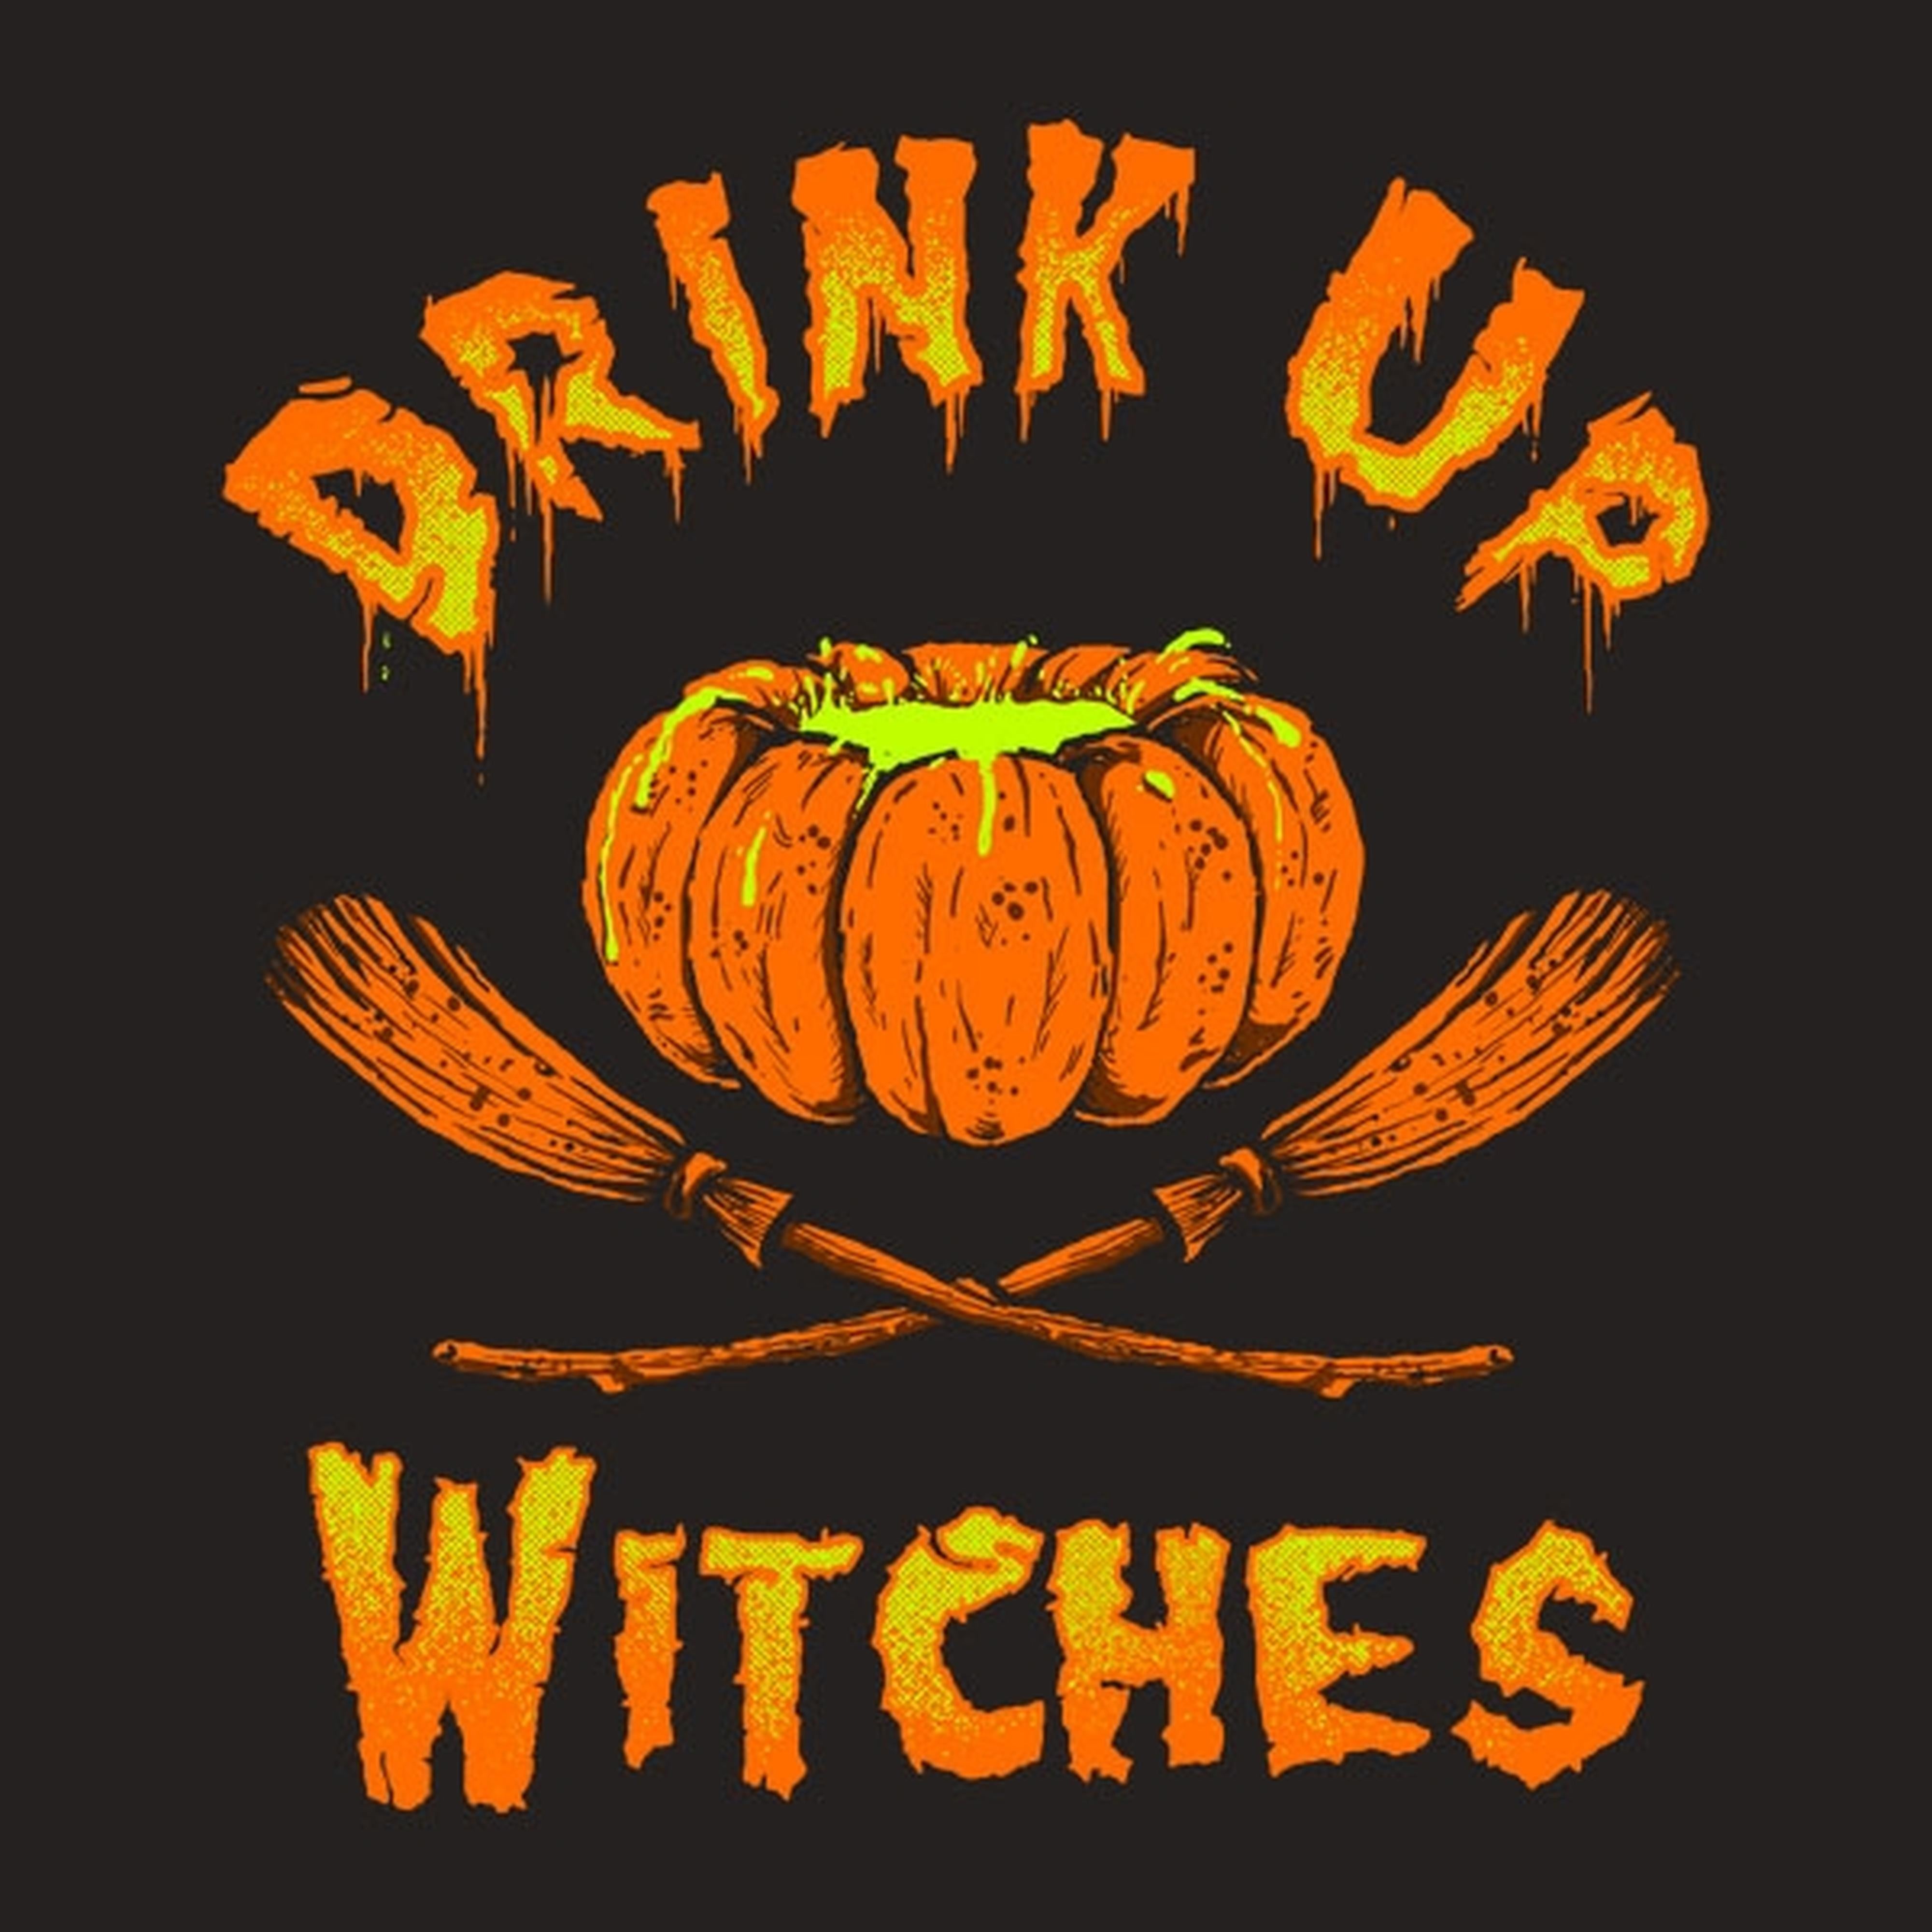 Drink up witches - T-shirt